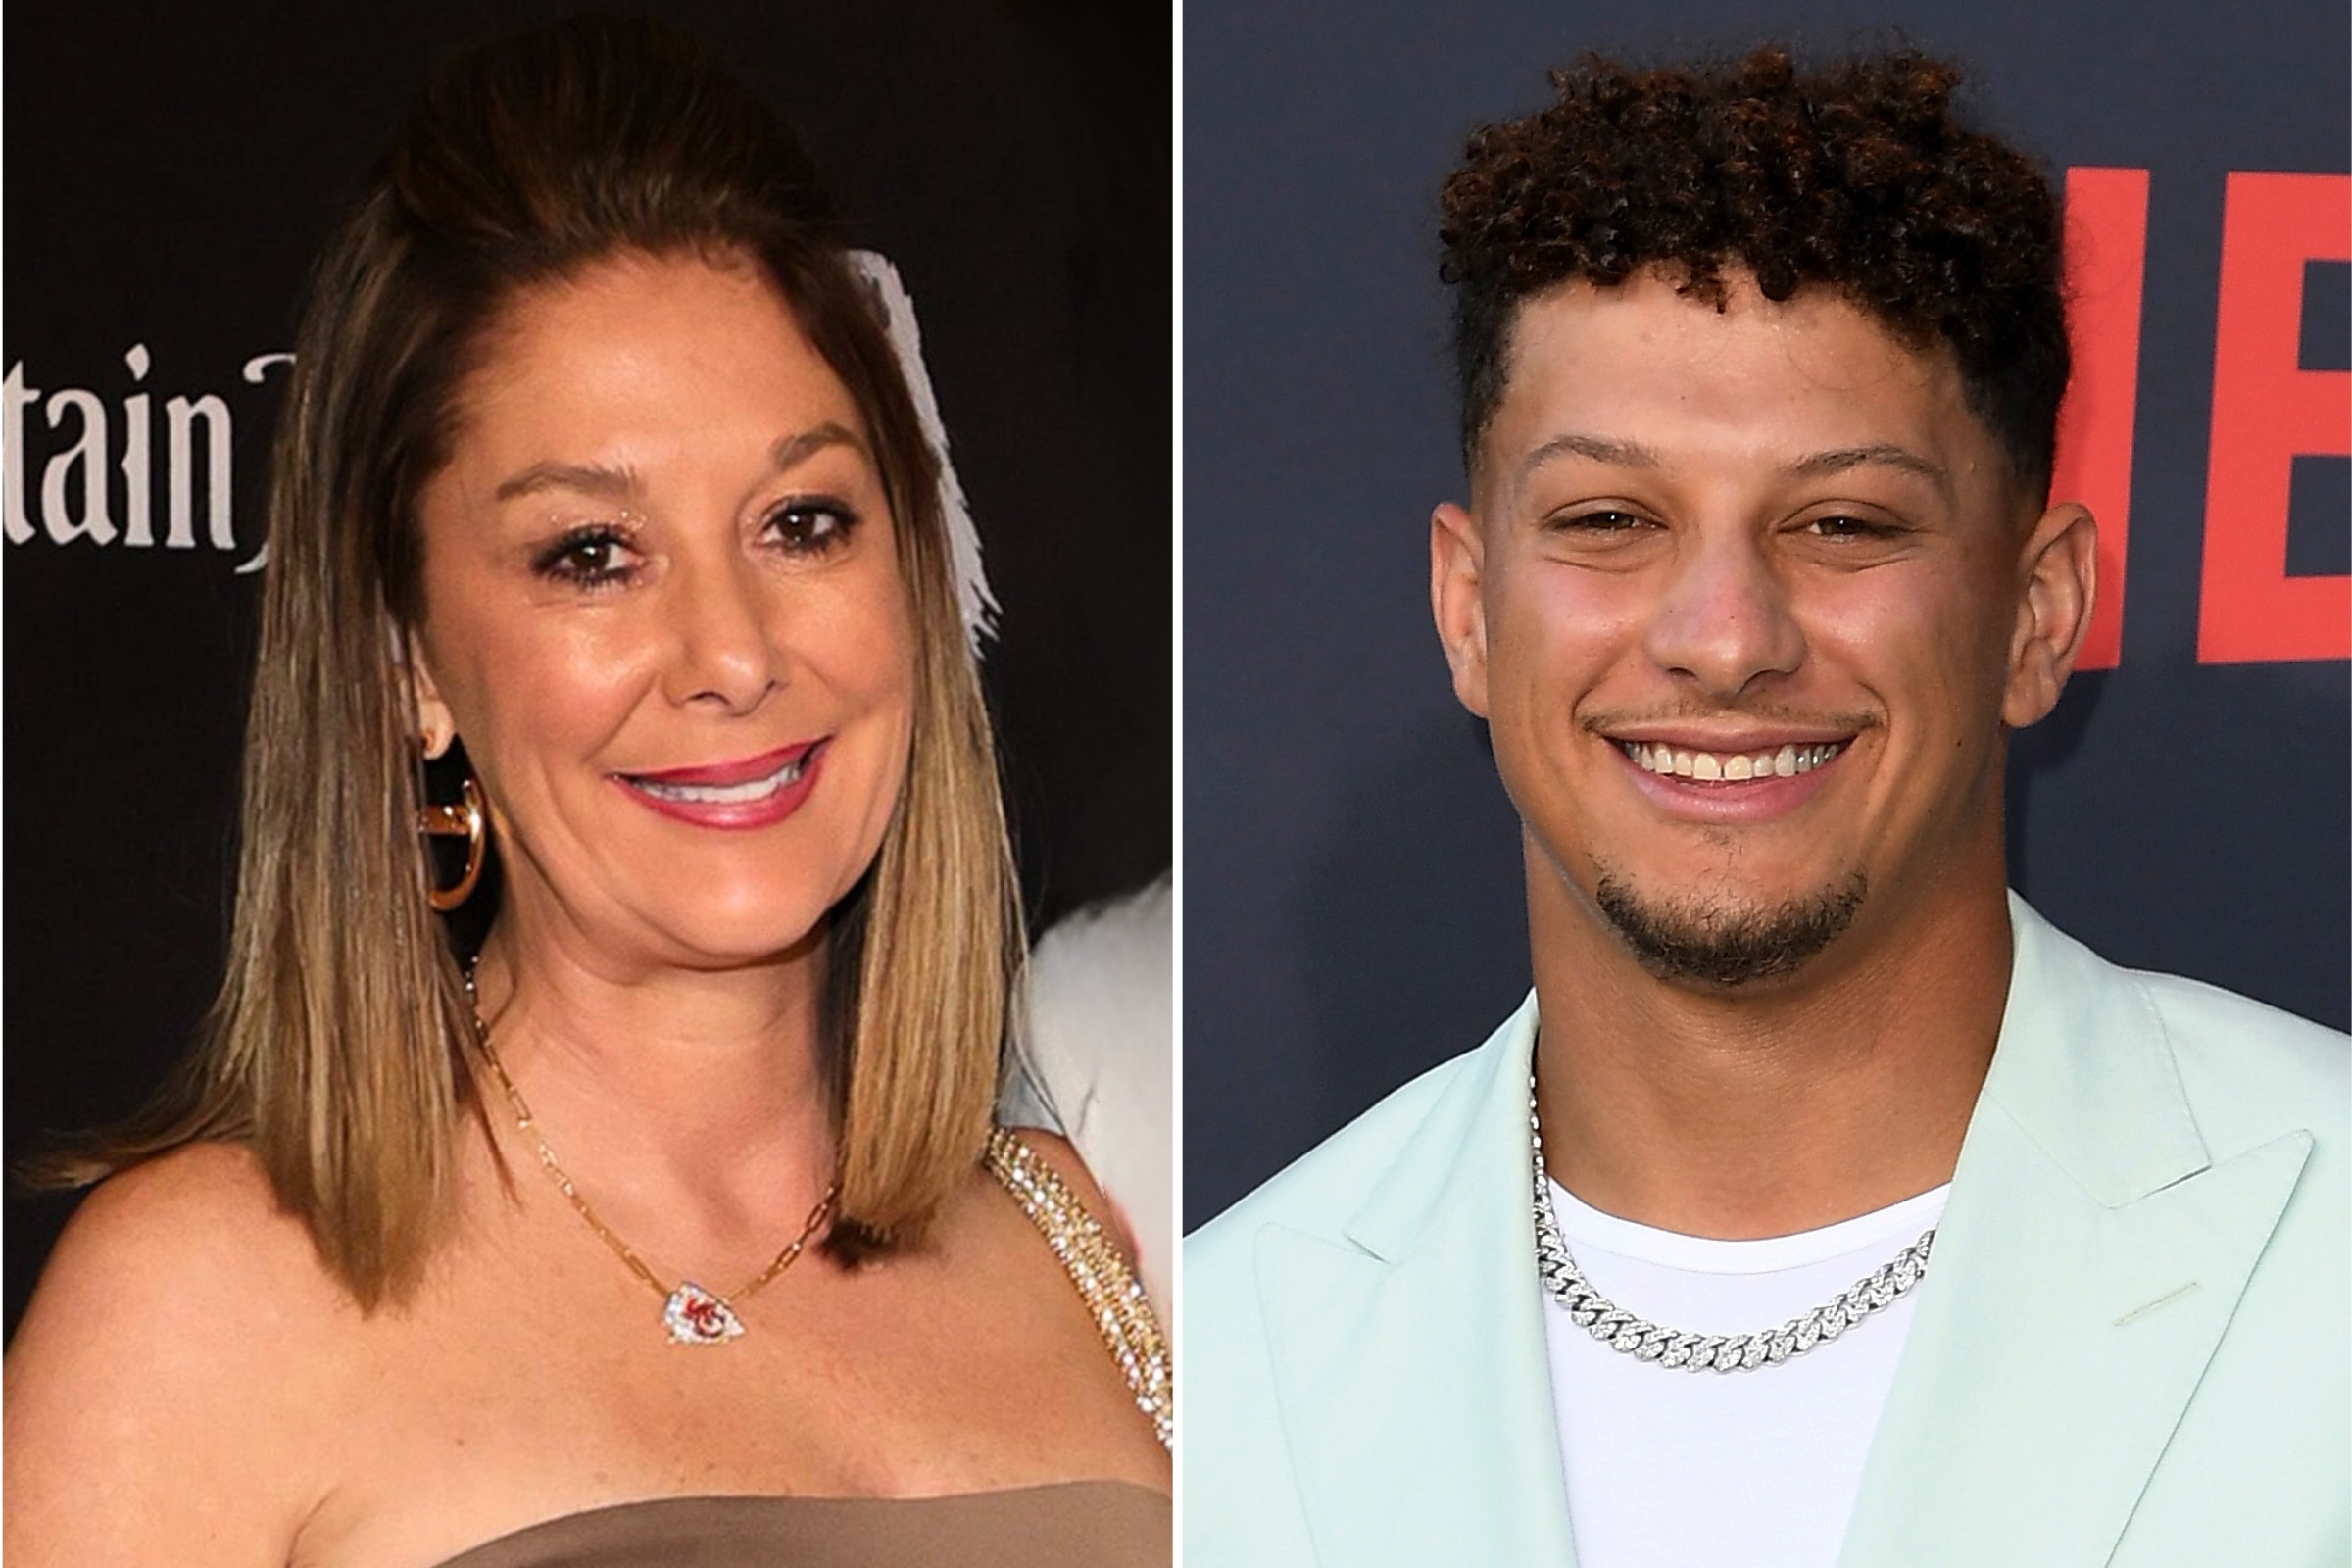 Worth a Hell; Patrick Mahomes’ yet suffocate Mom with another special gift makes mother Randi emotional” Blessing God for him”